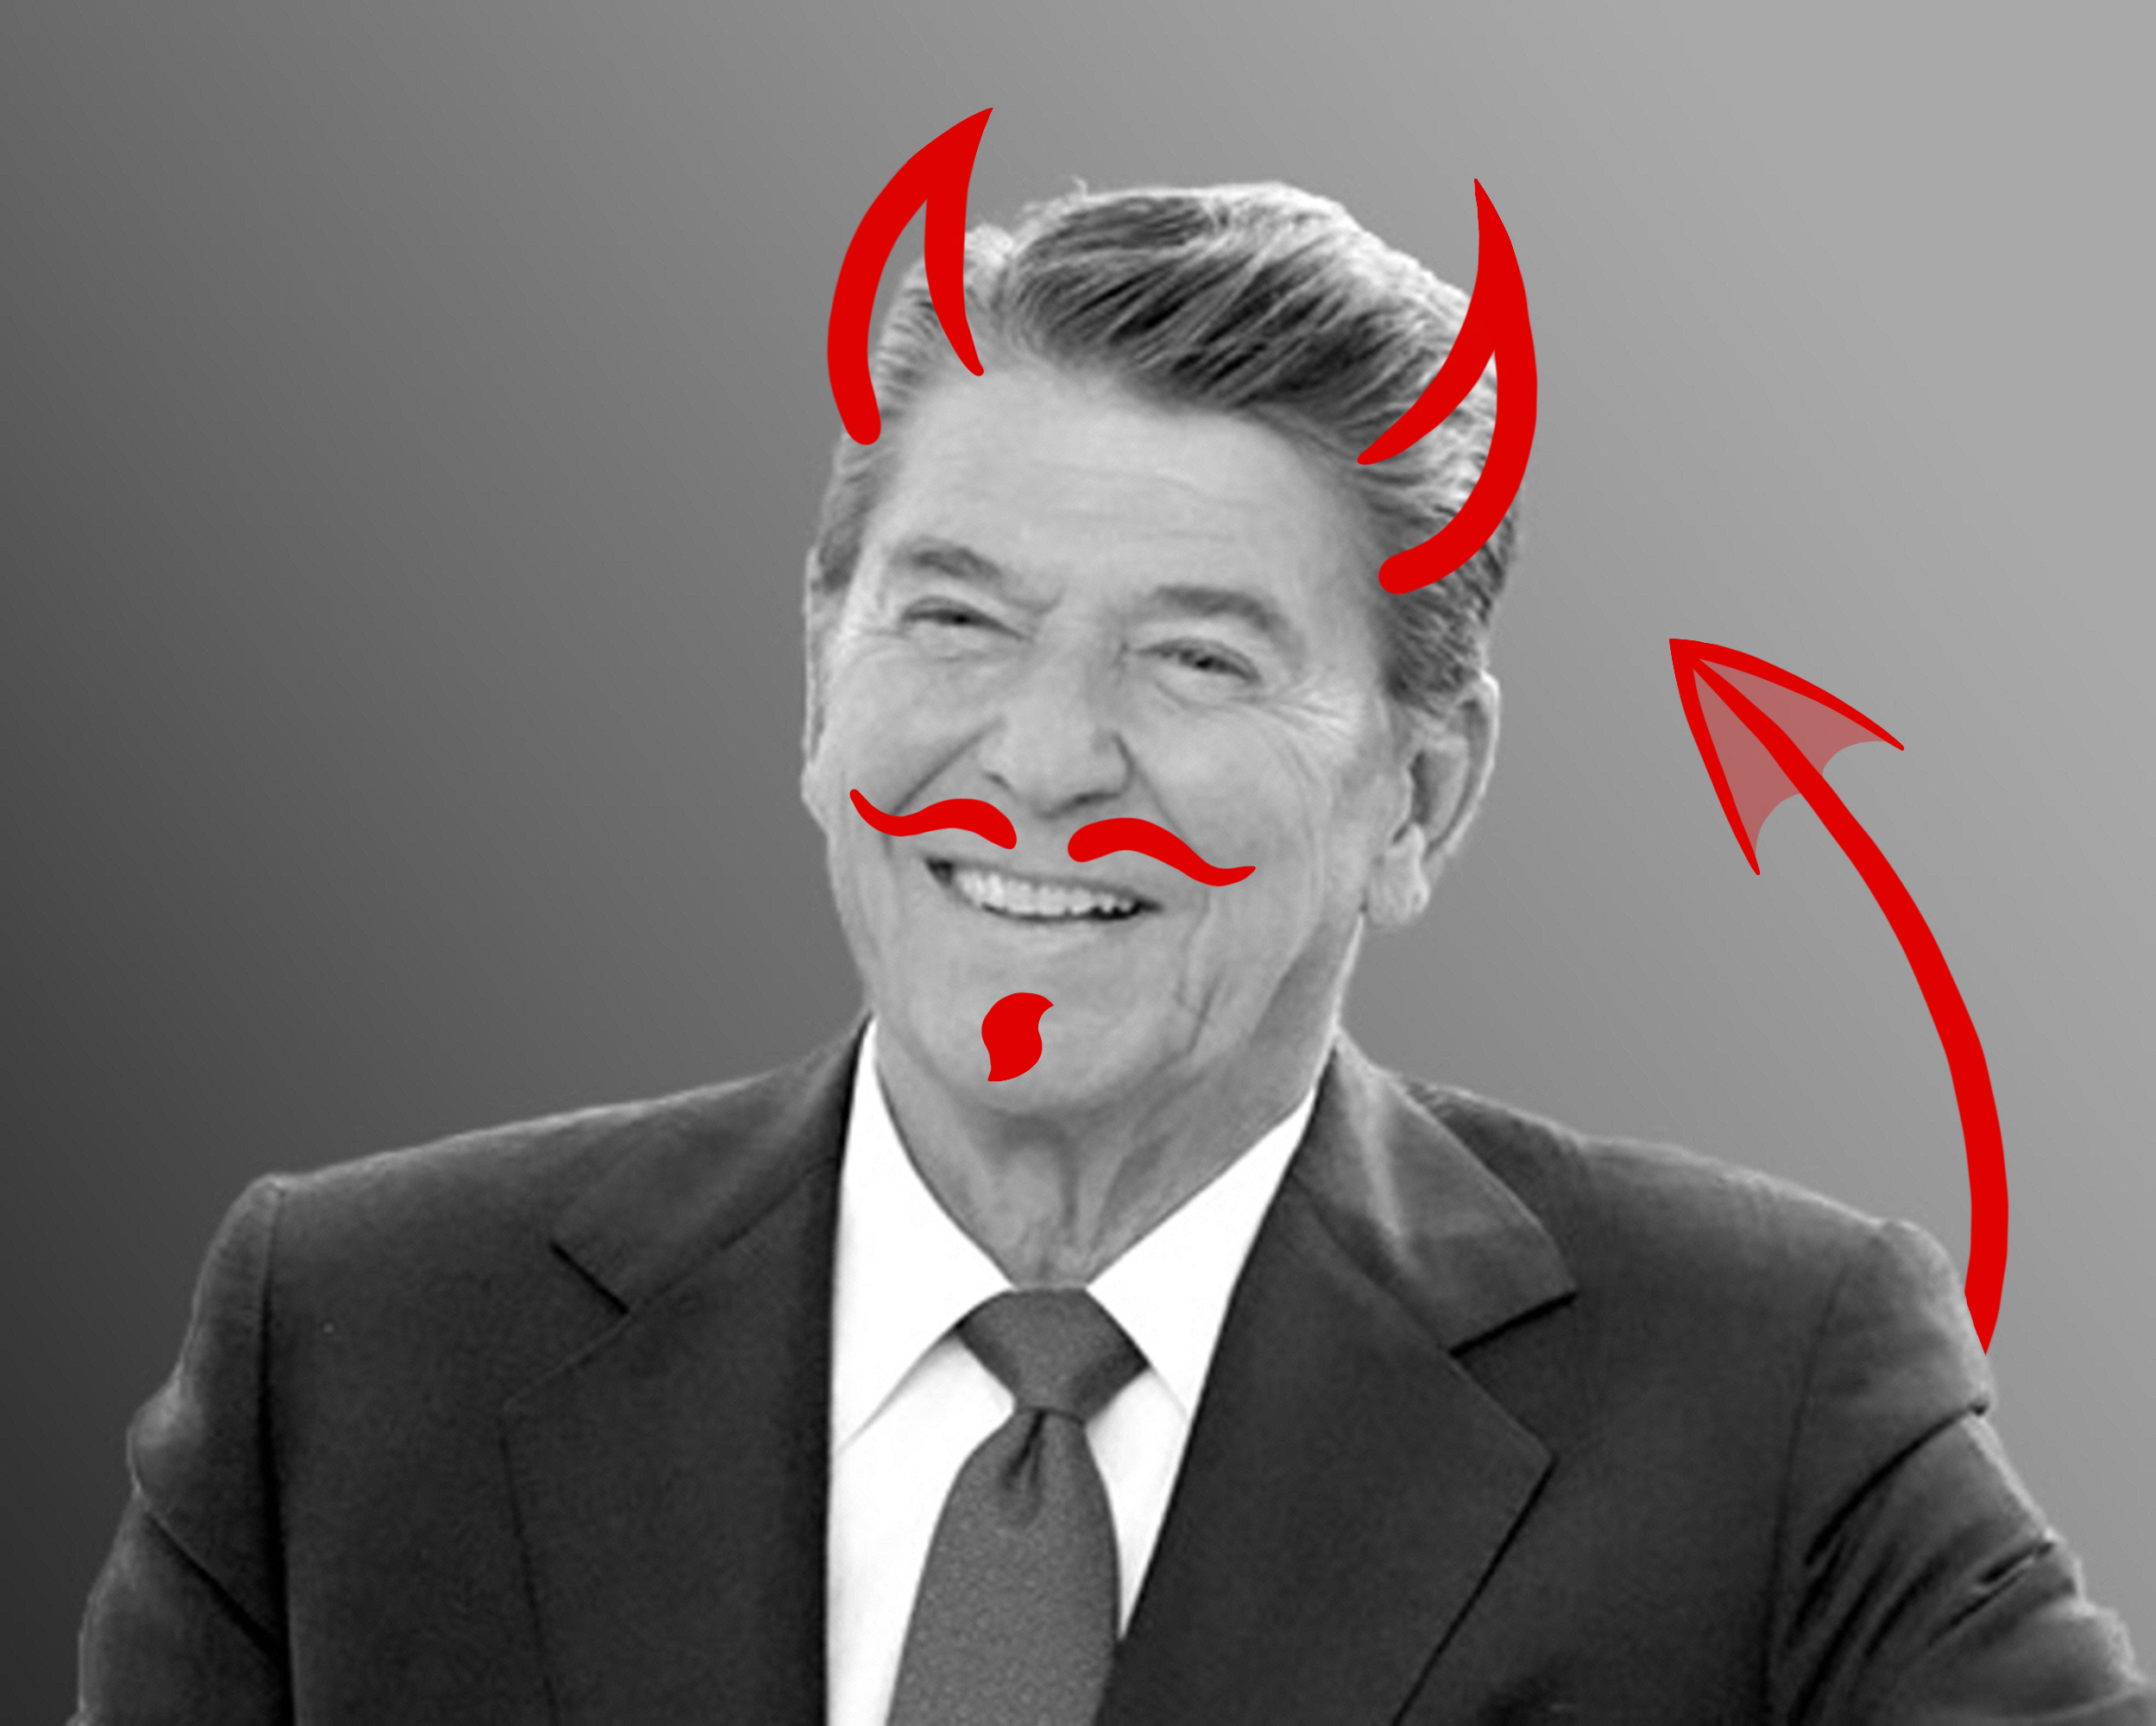 black and white photo of Ronald Reagan with devil horns, facial hair, and a pointed tail drawn on it in red